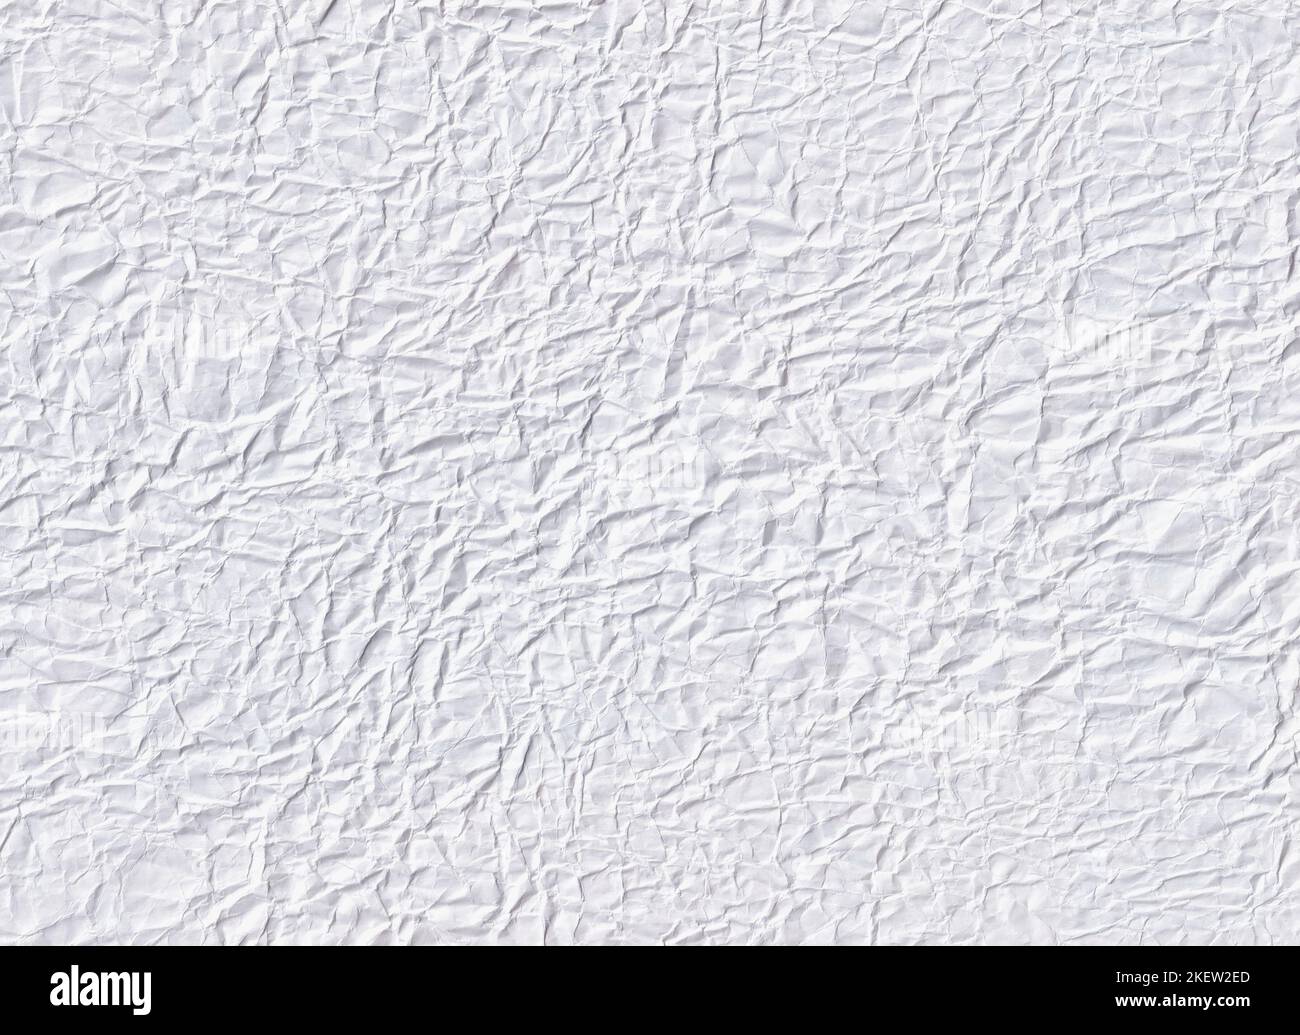 Crumpled white paper surface with creases and folds texture. Abstract grunge background. Stock Photo